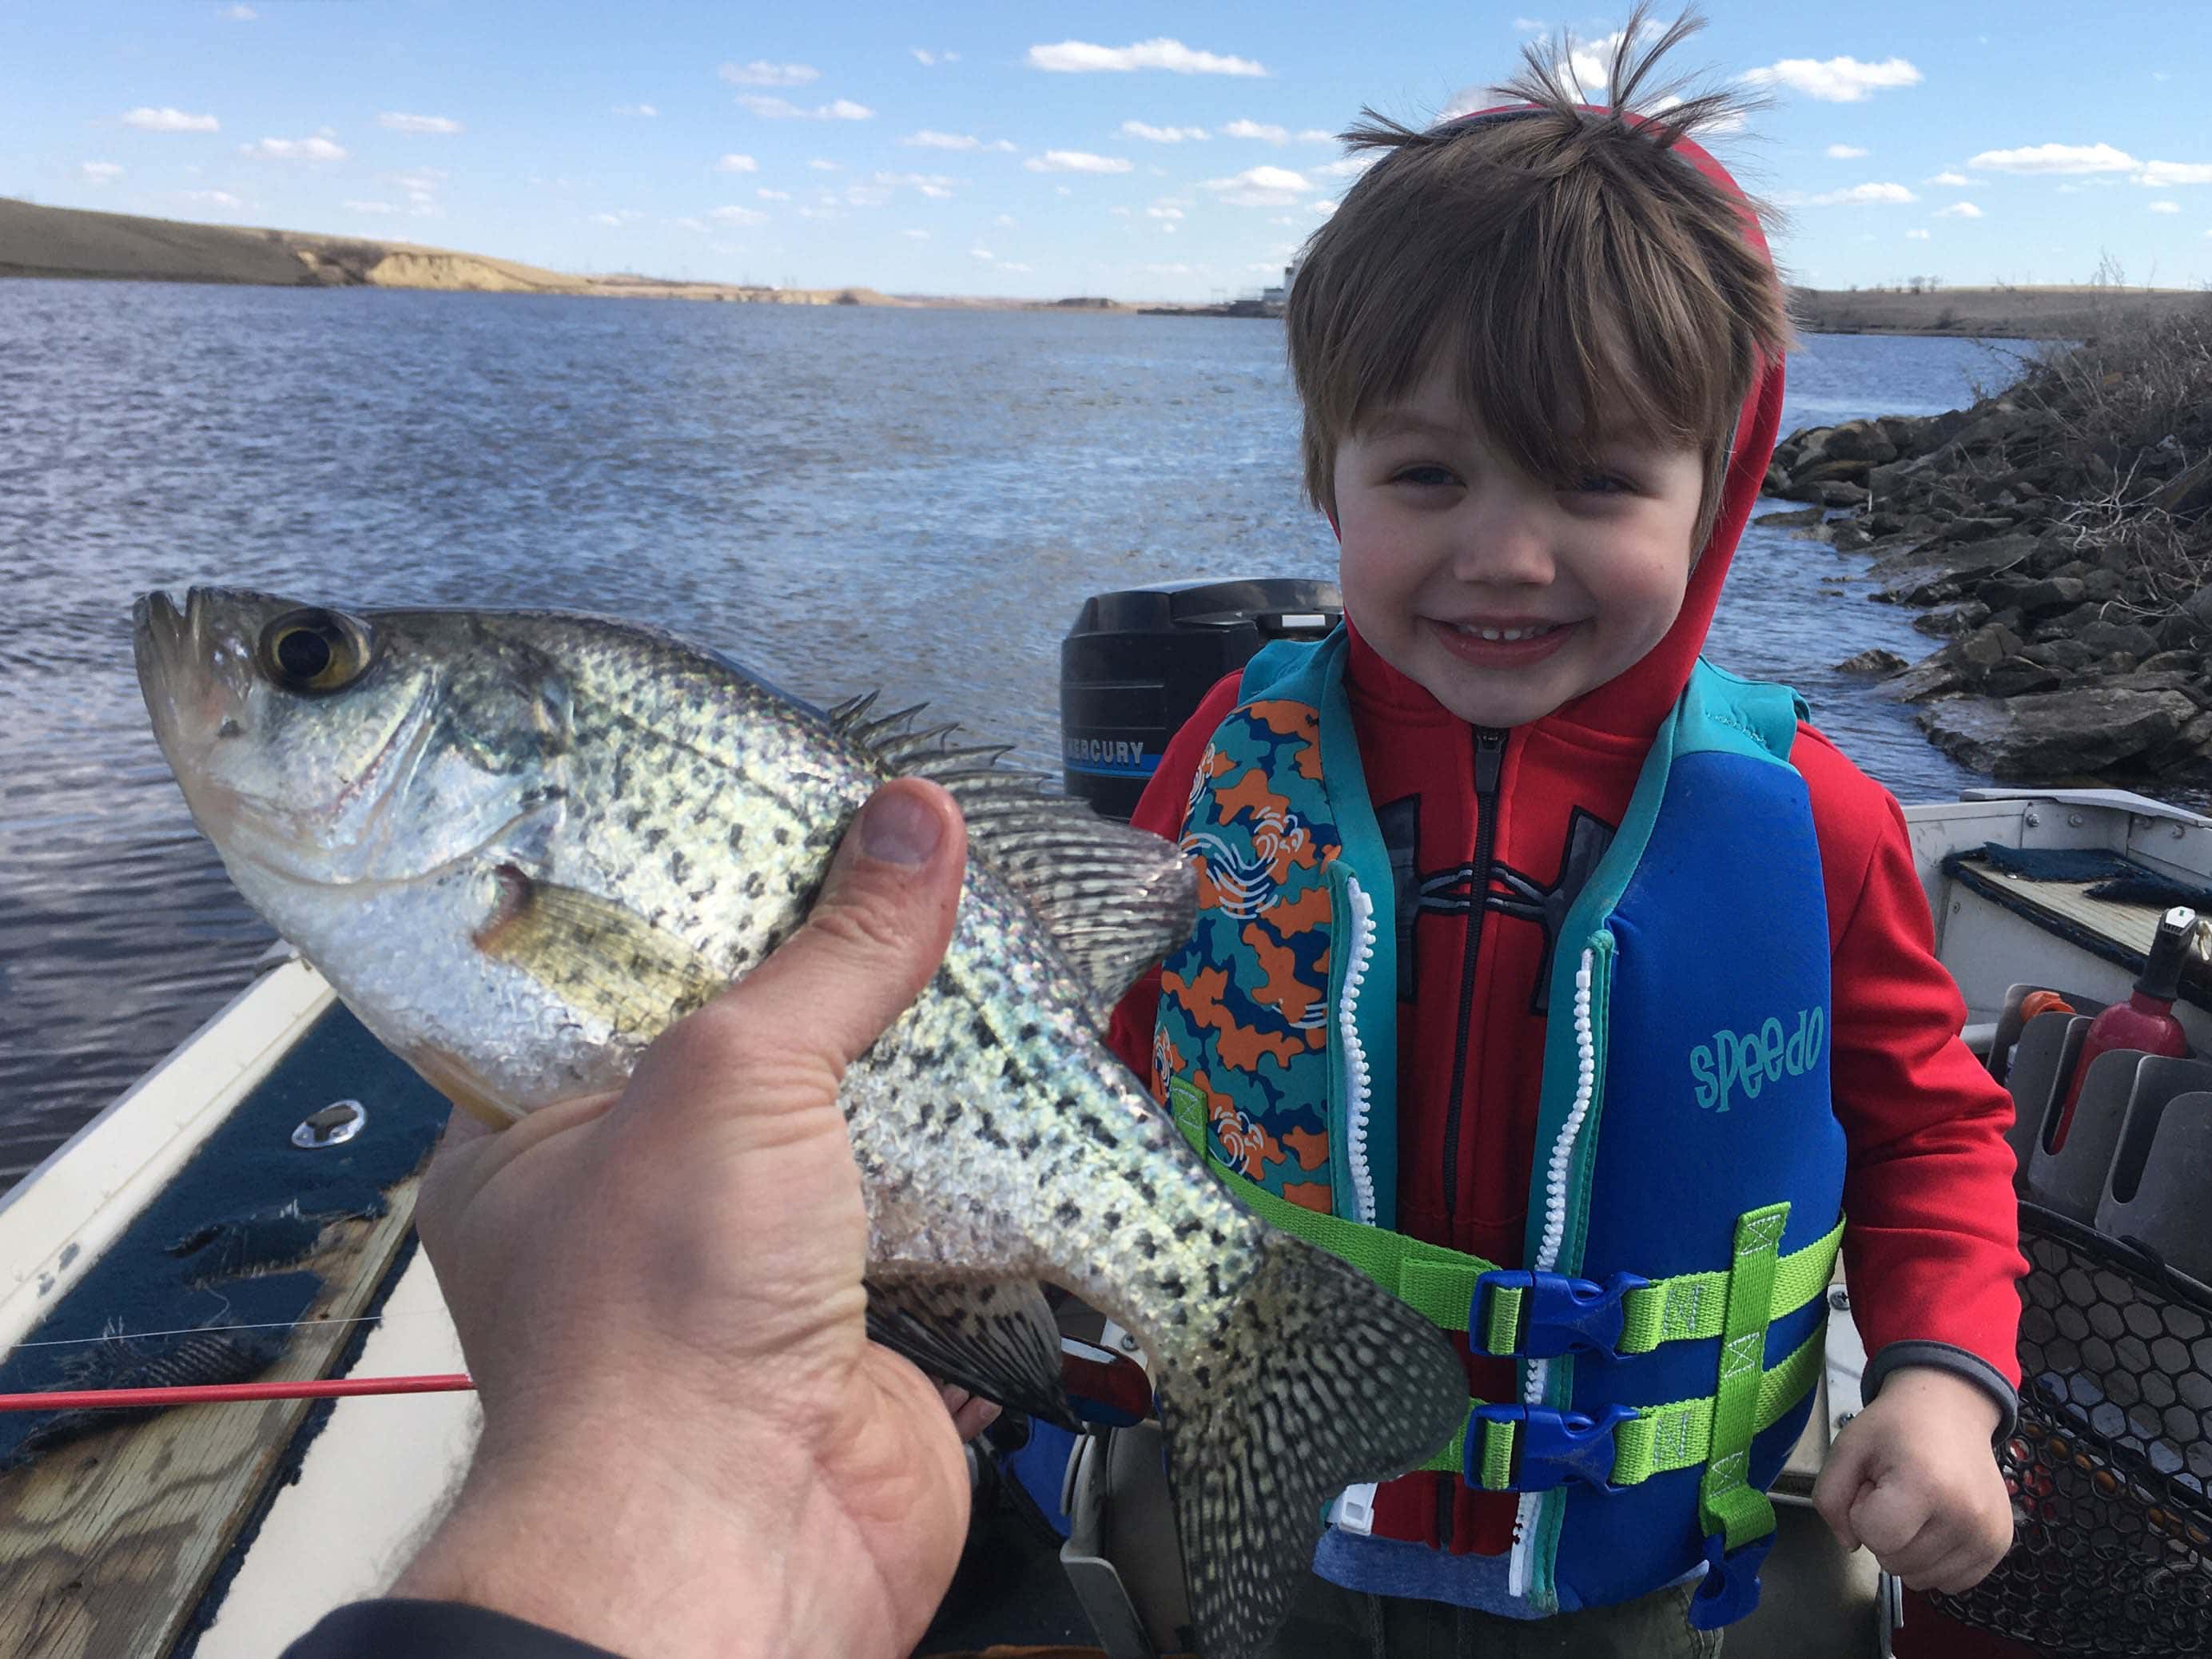 Our Outdoors: Fishing 101